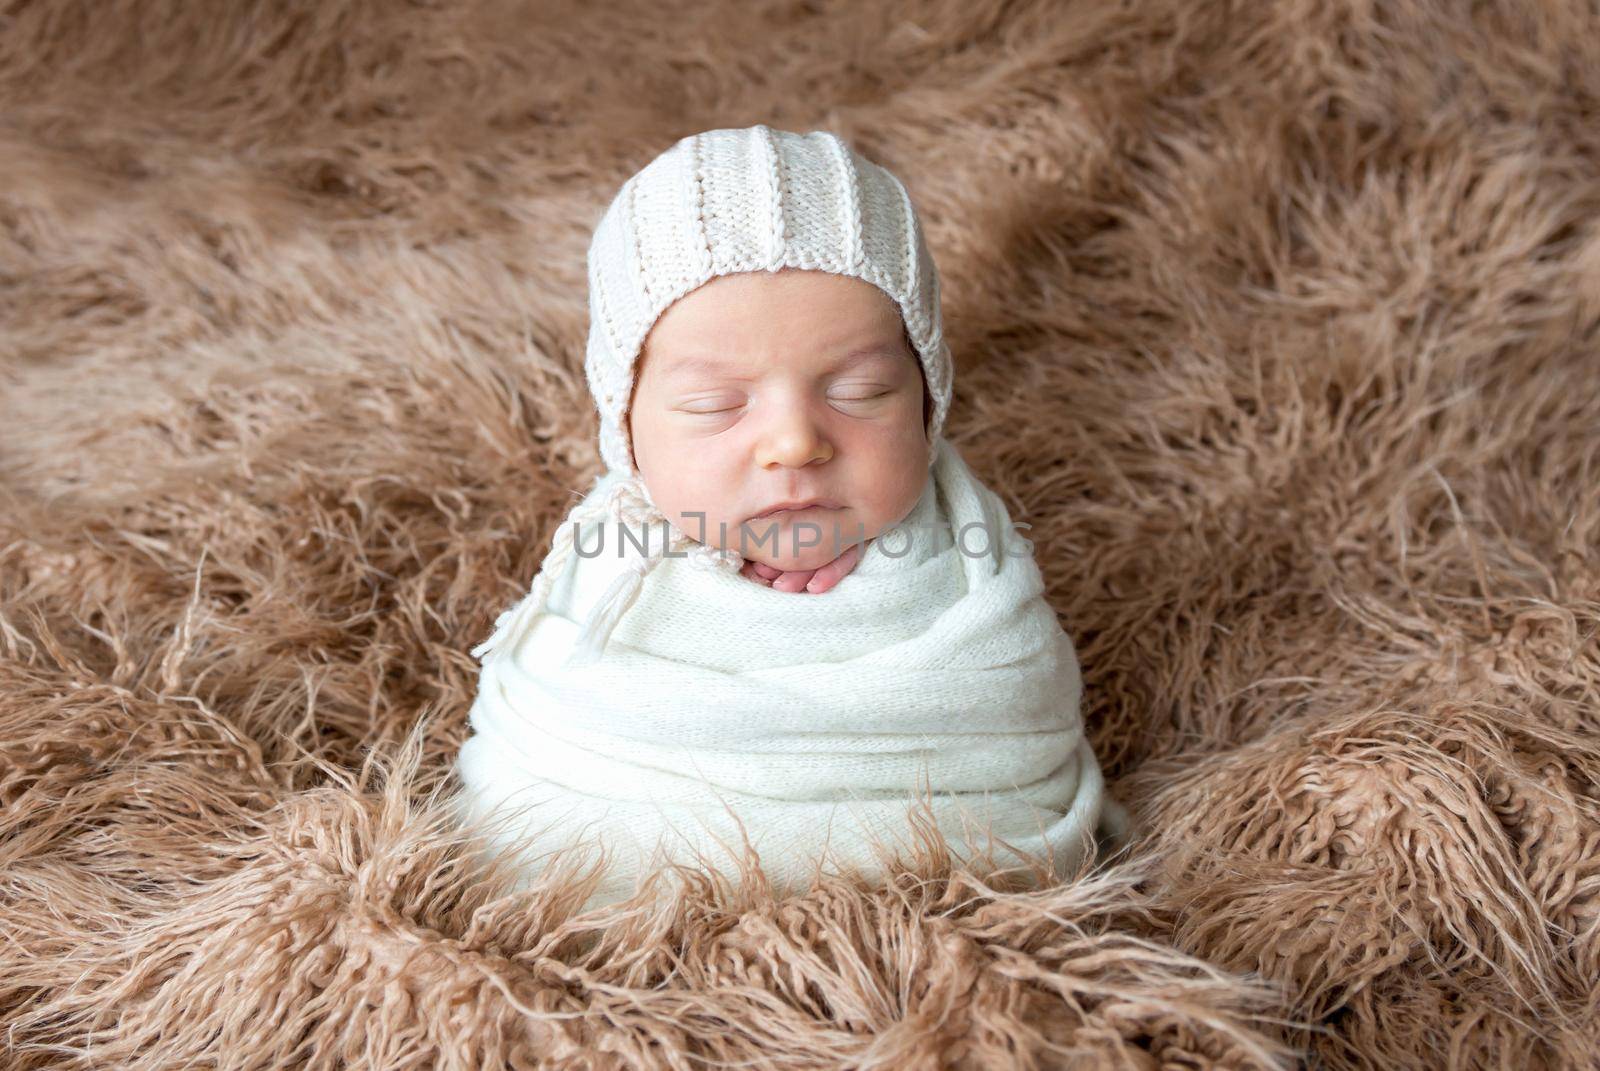 Newborn child swaddled in a white woolen cloth is sleeping on brown fluffy plaid